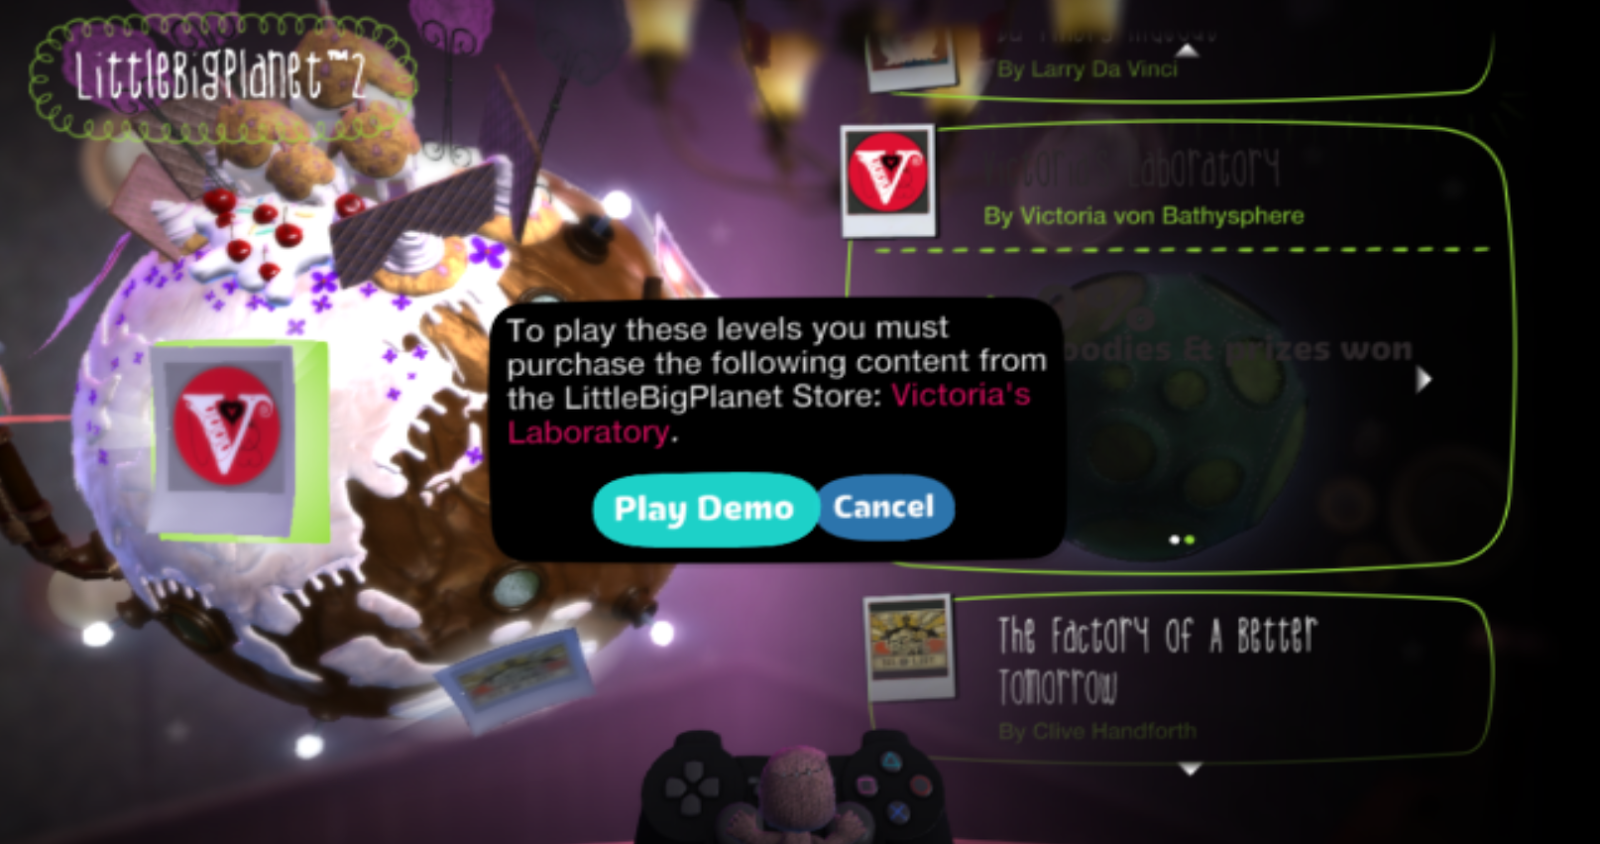 To play these levels you must purchase the following content from the littlebigplanet store: victoria's lab